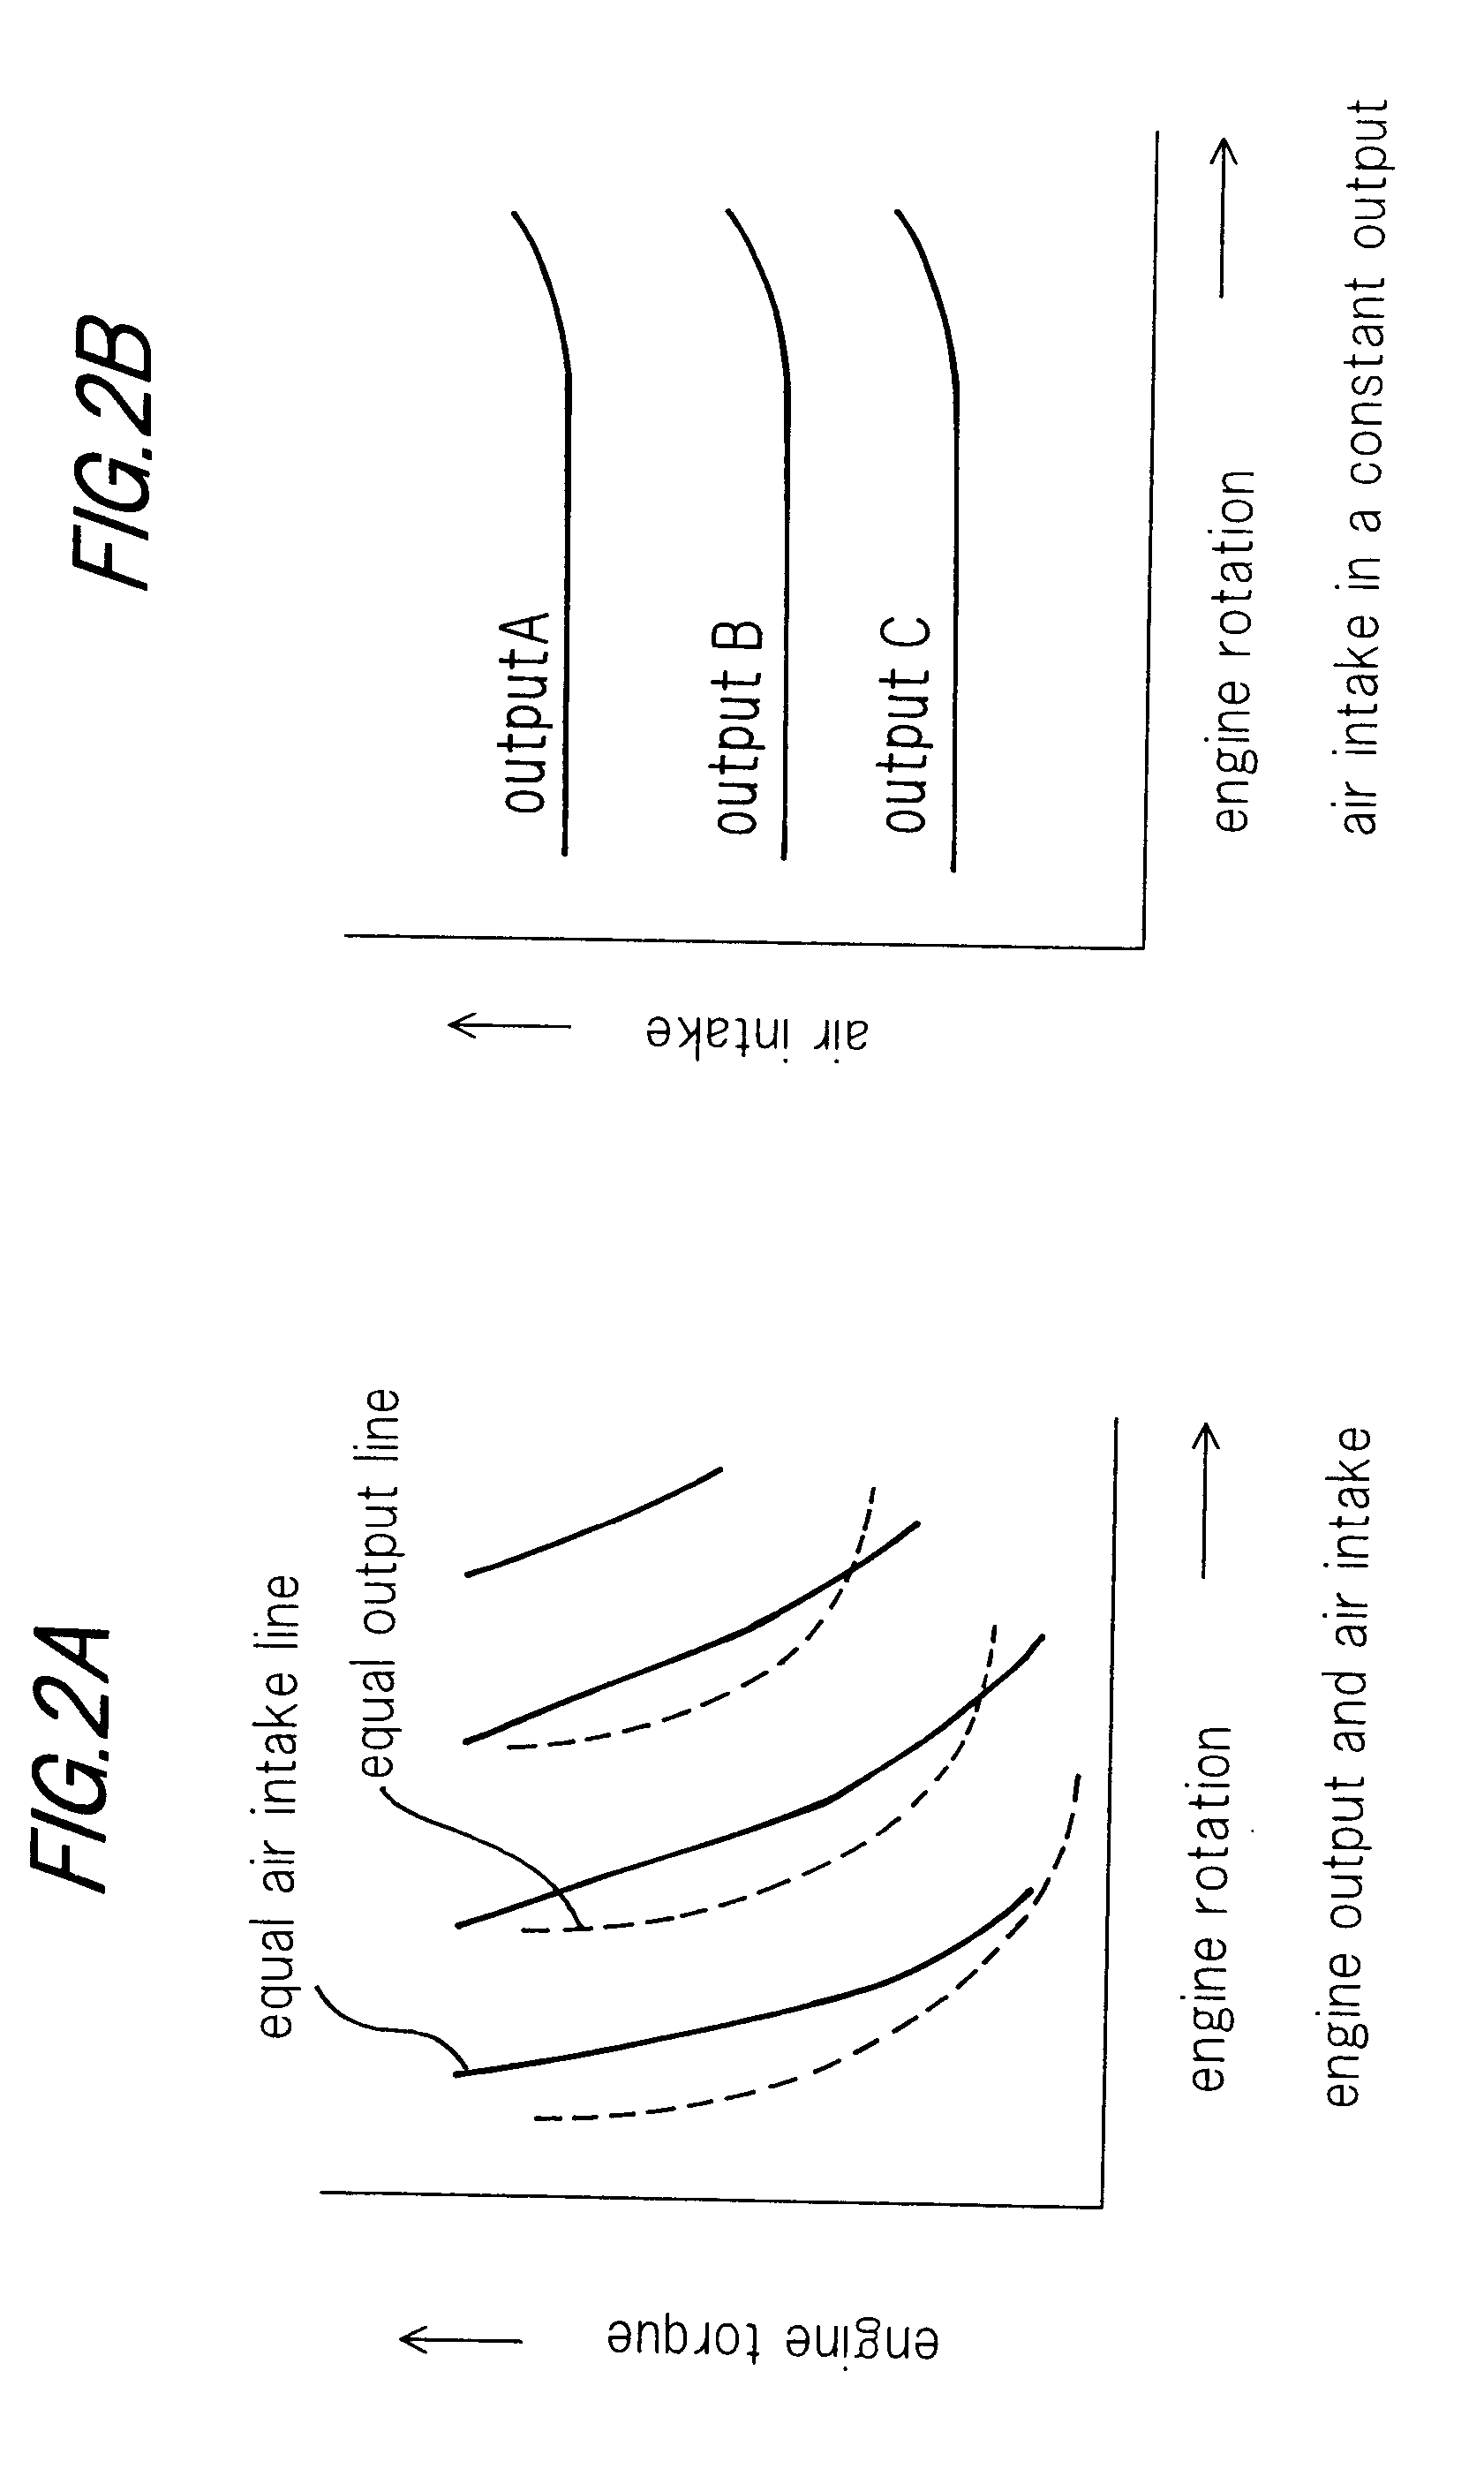 Generator control device for an electrical automobile